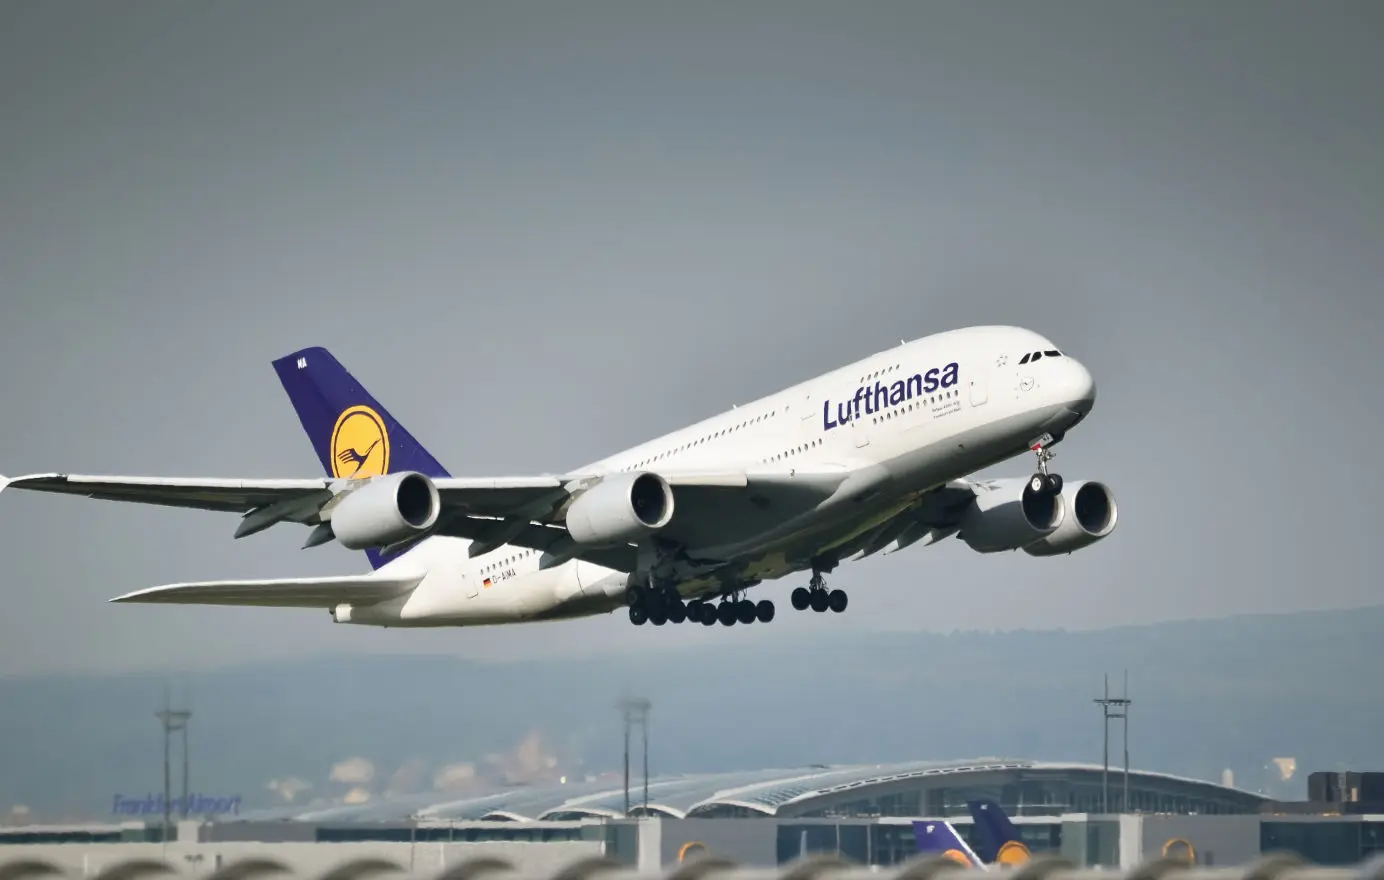 Airbus made 251 of their double-decker A380